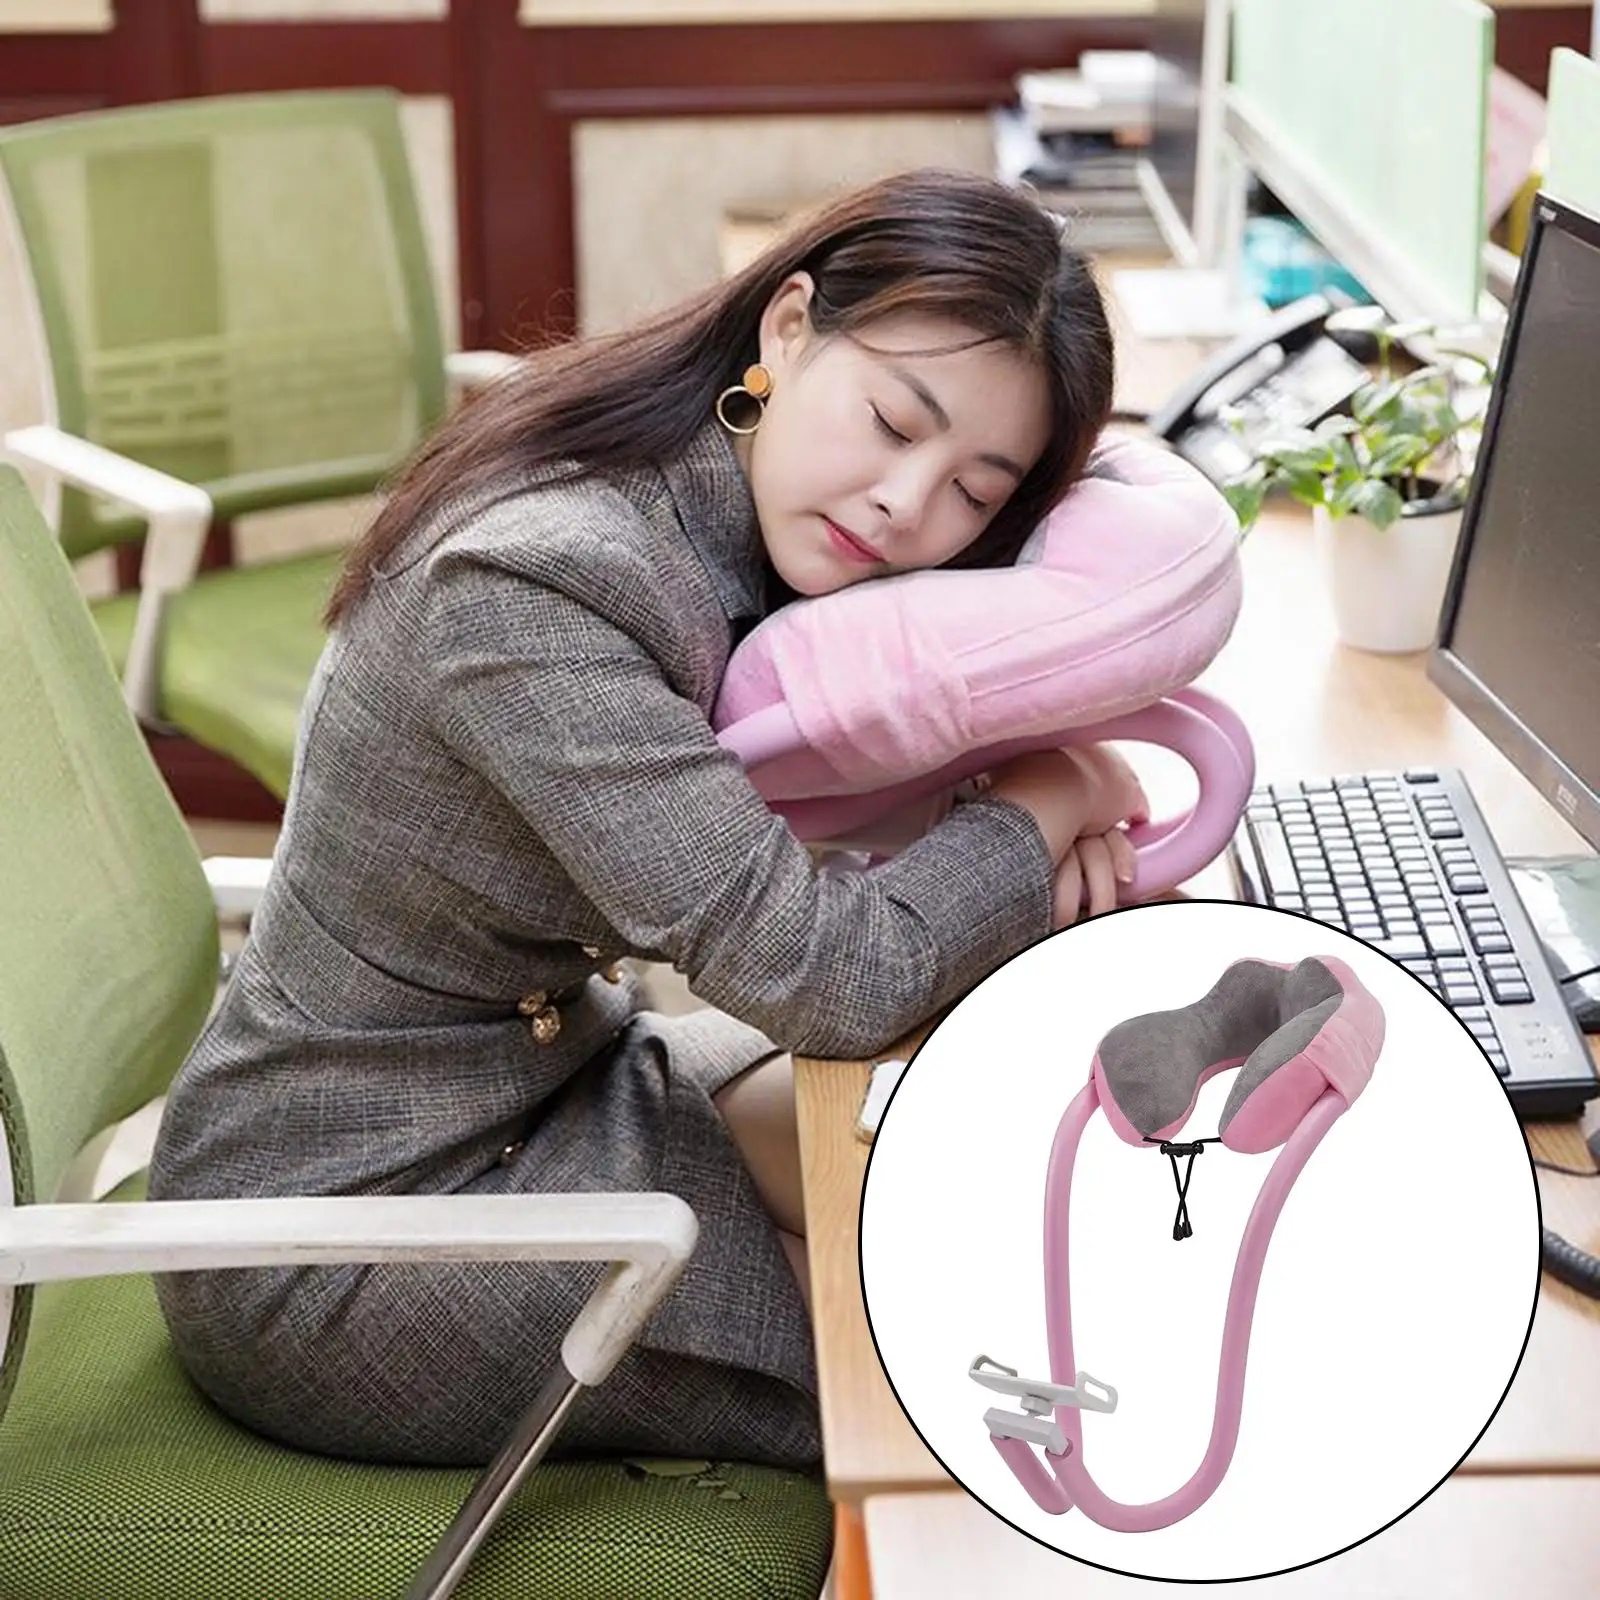 Travel Pillow with Mobile Phone Holder U Shape Neck Support Pillow Portable Flexible Folded Travel Pillow